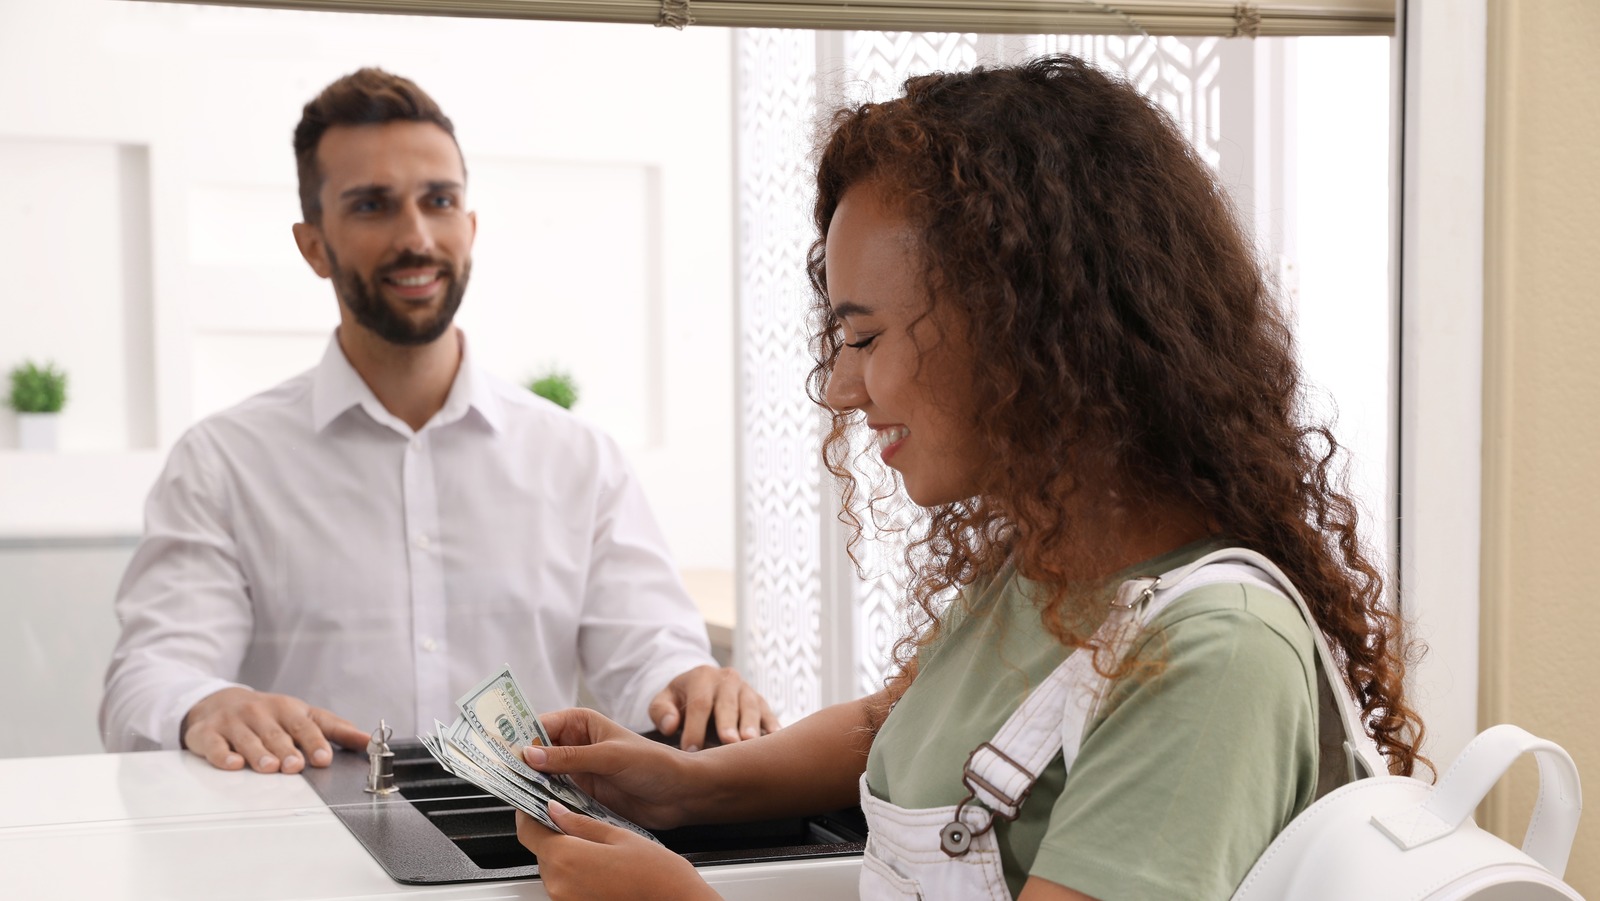 How Much Does a Bank Teller Make? (The Complete Guide)